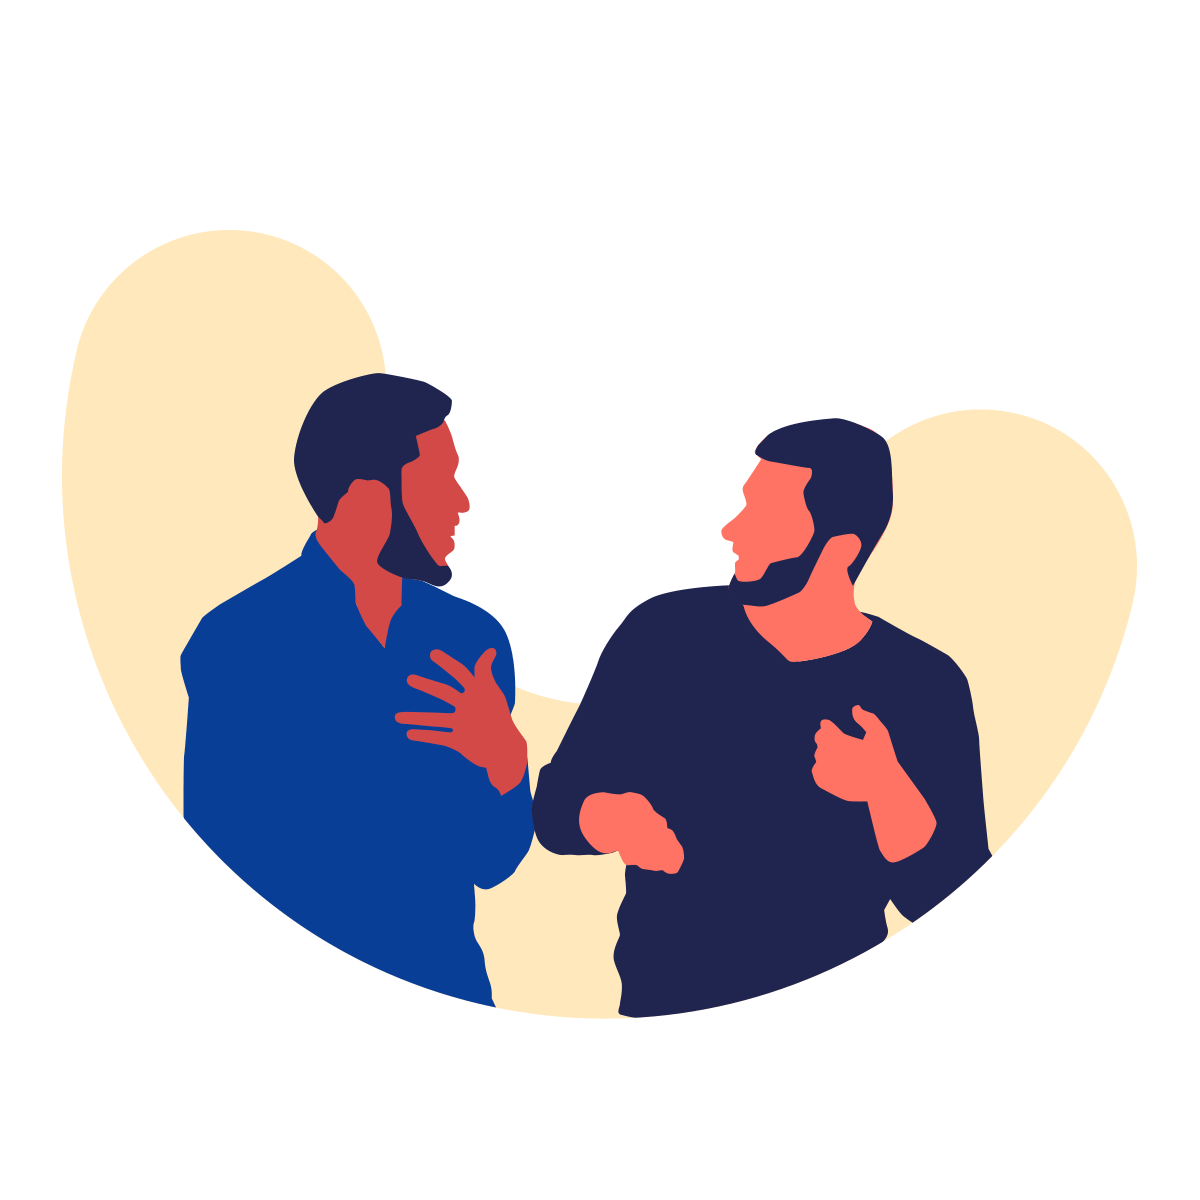 Two men talking to each other illustration